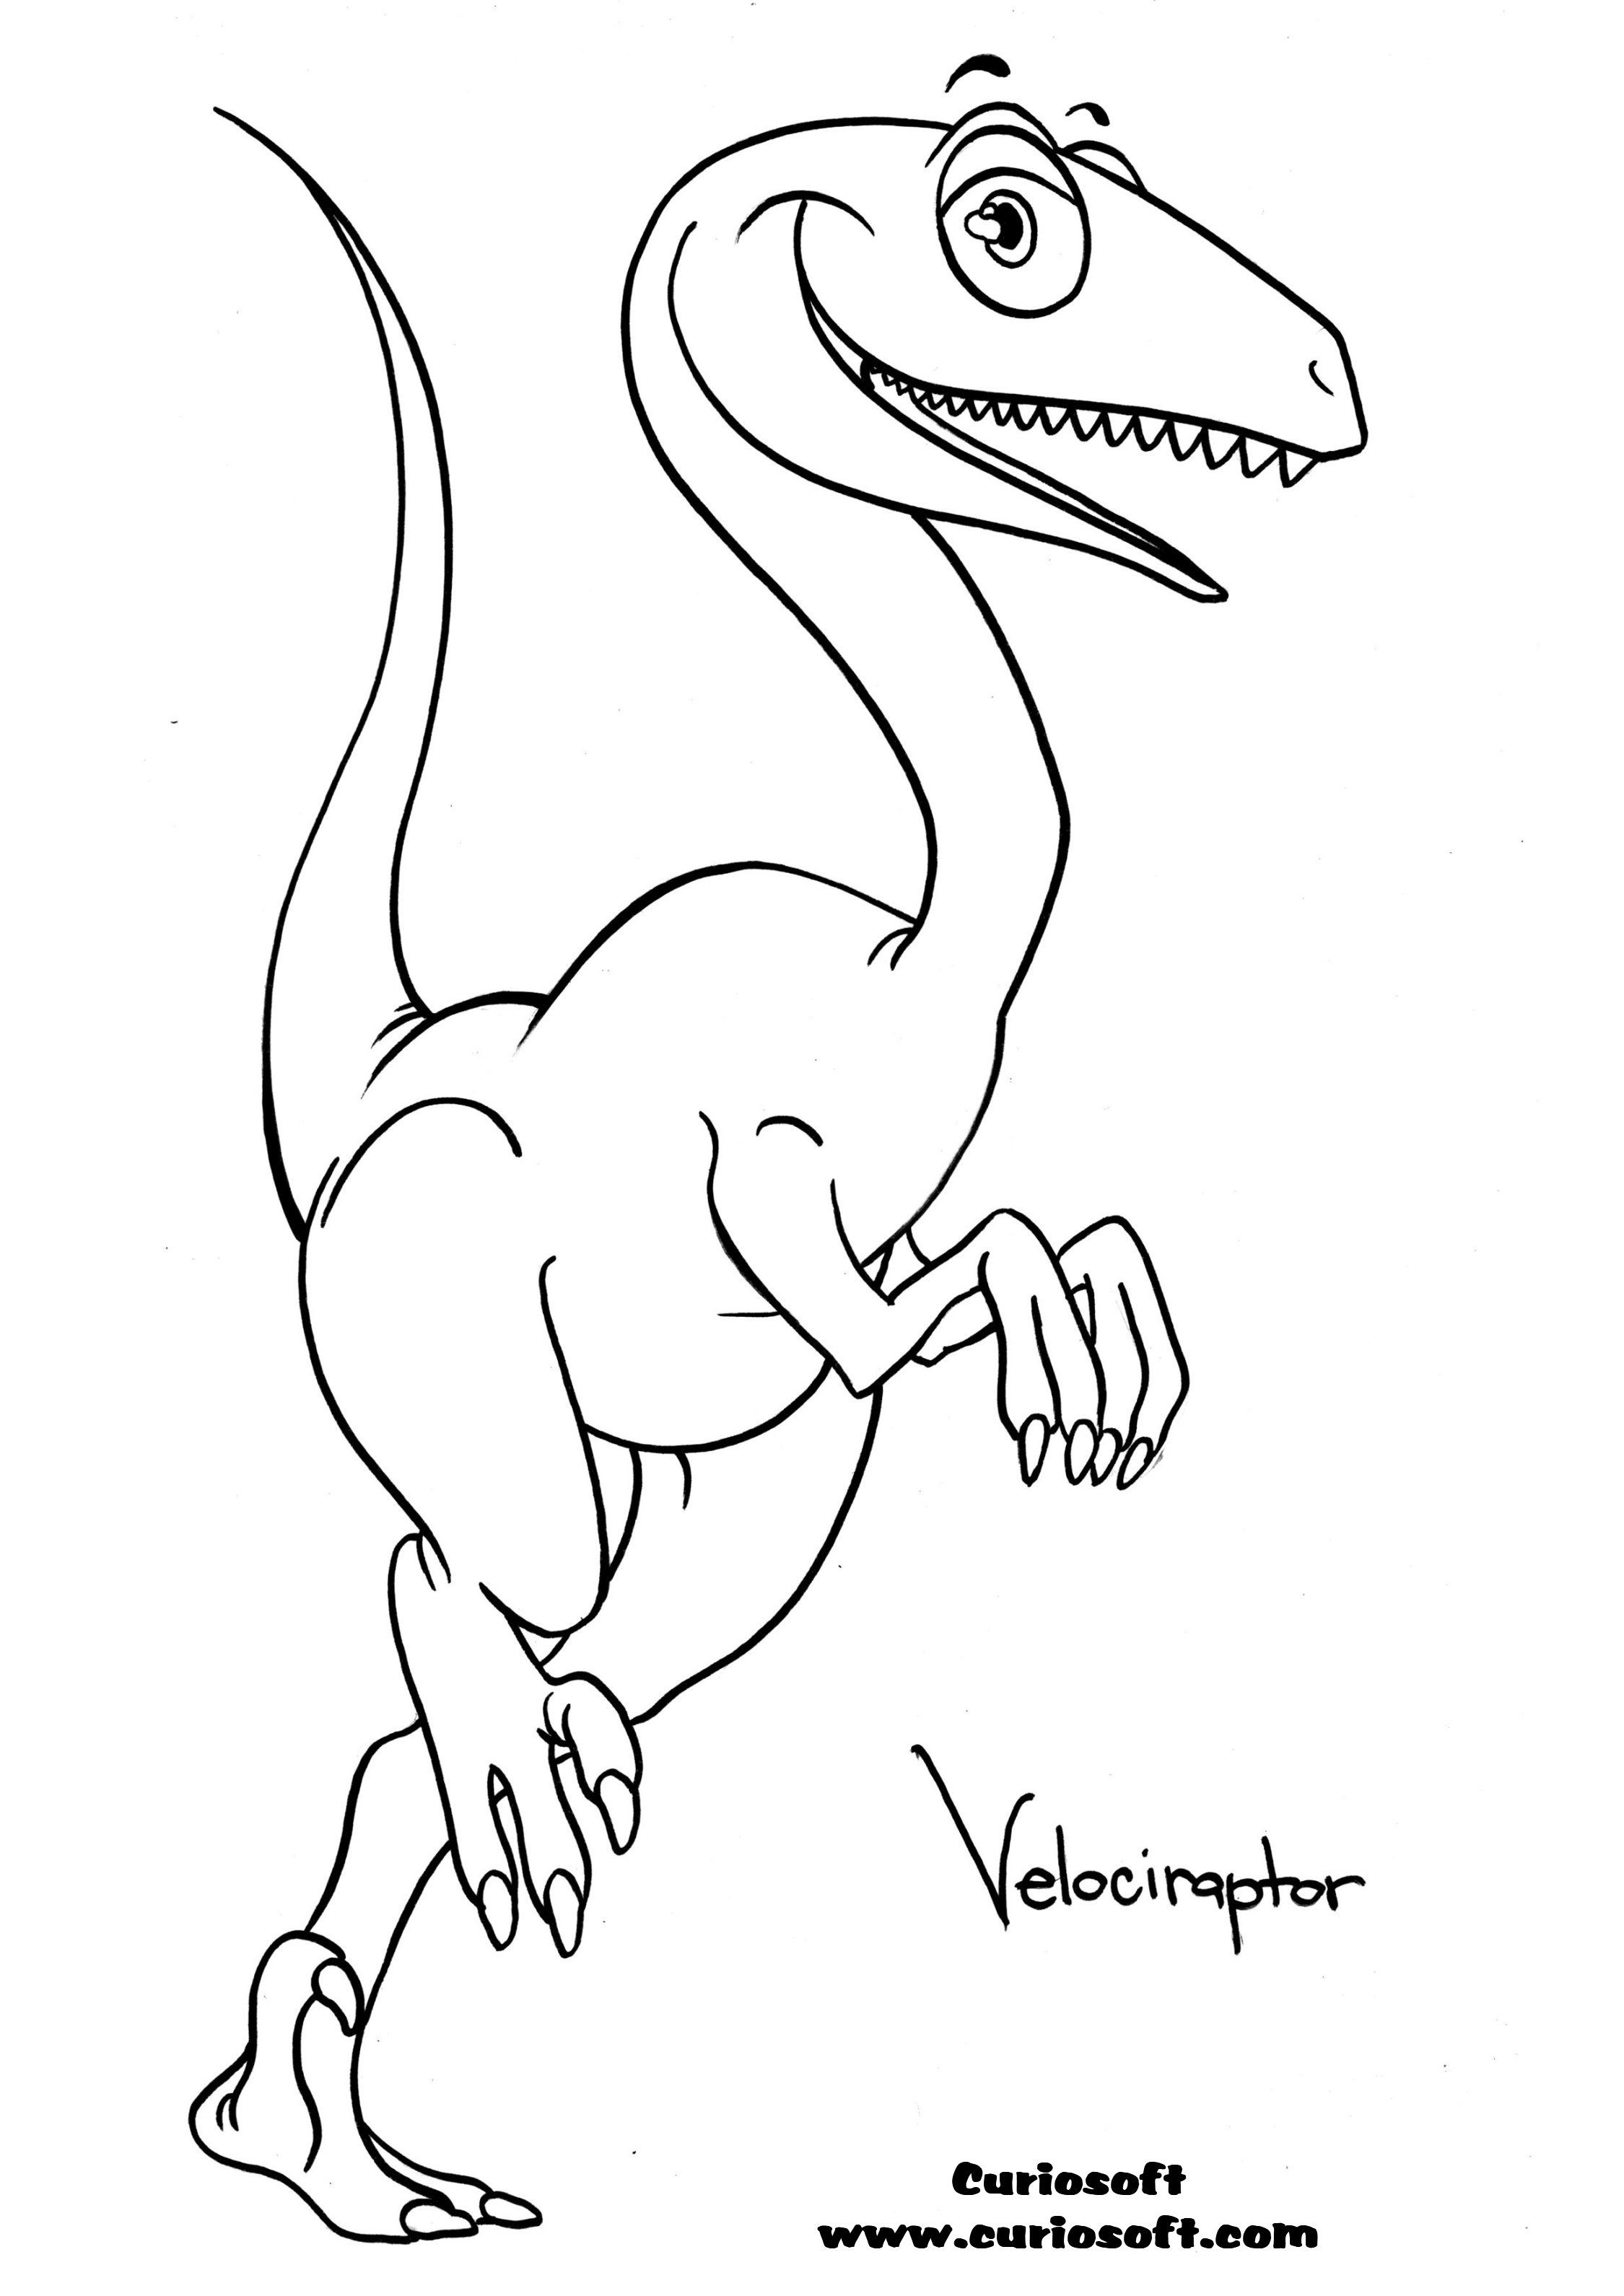 Velociraptor Coloring Pages | Barriee